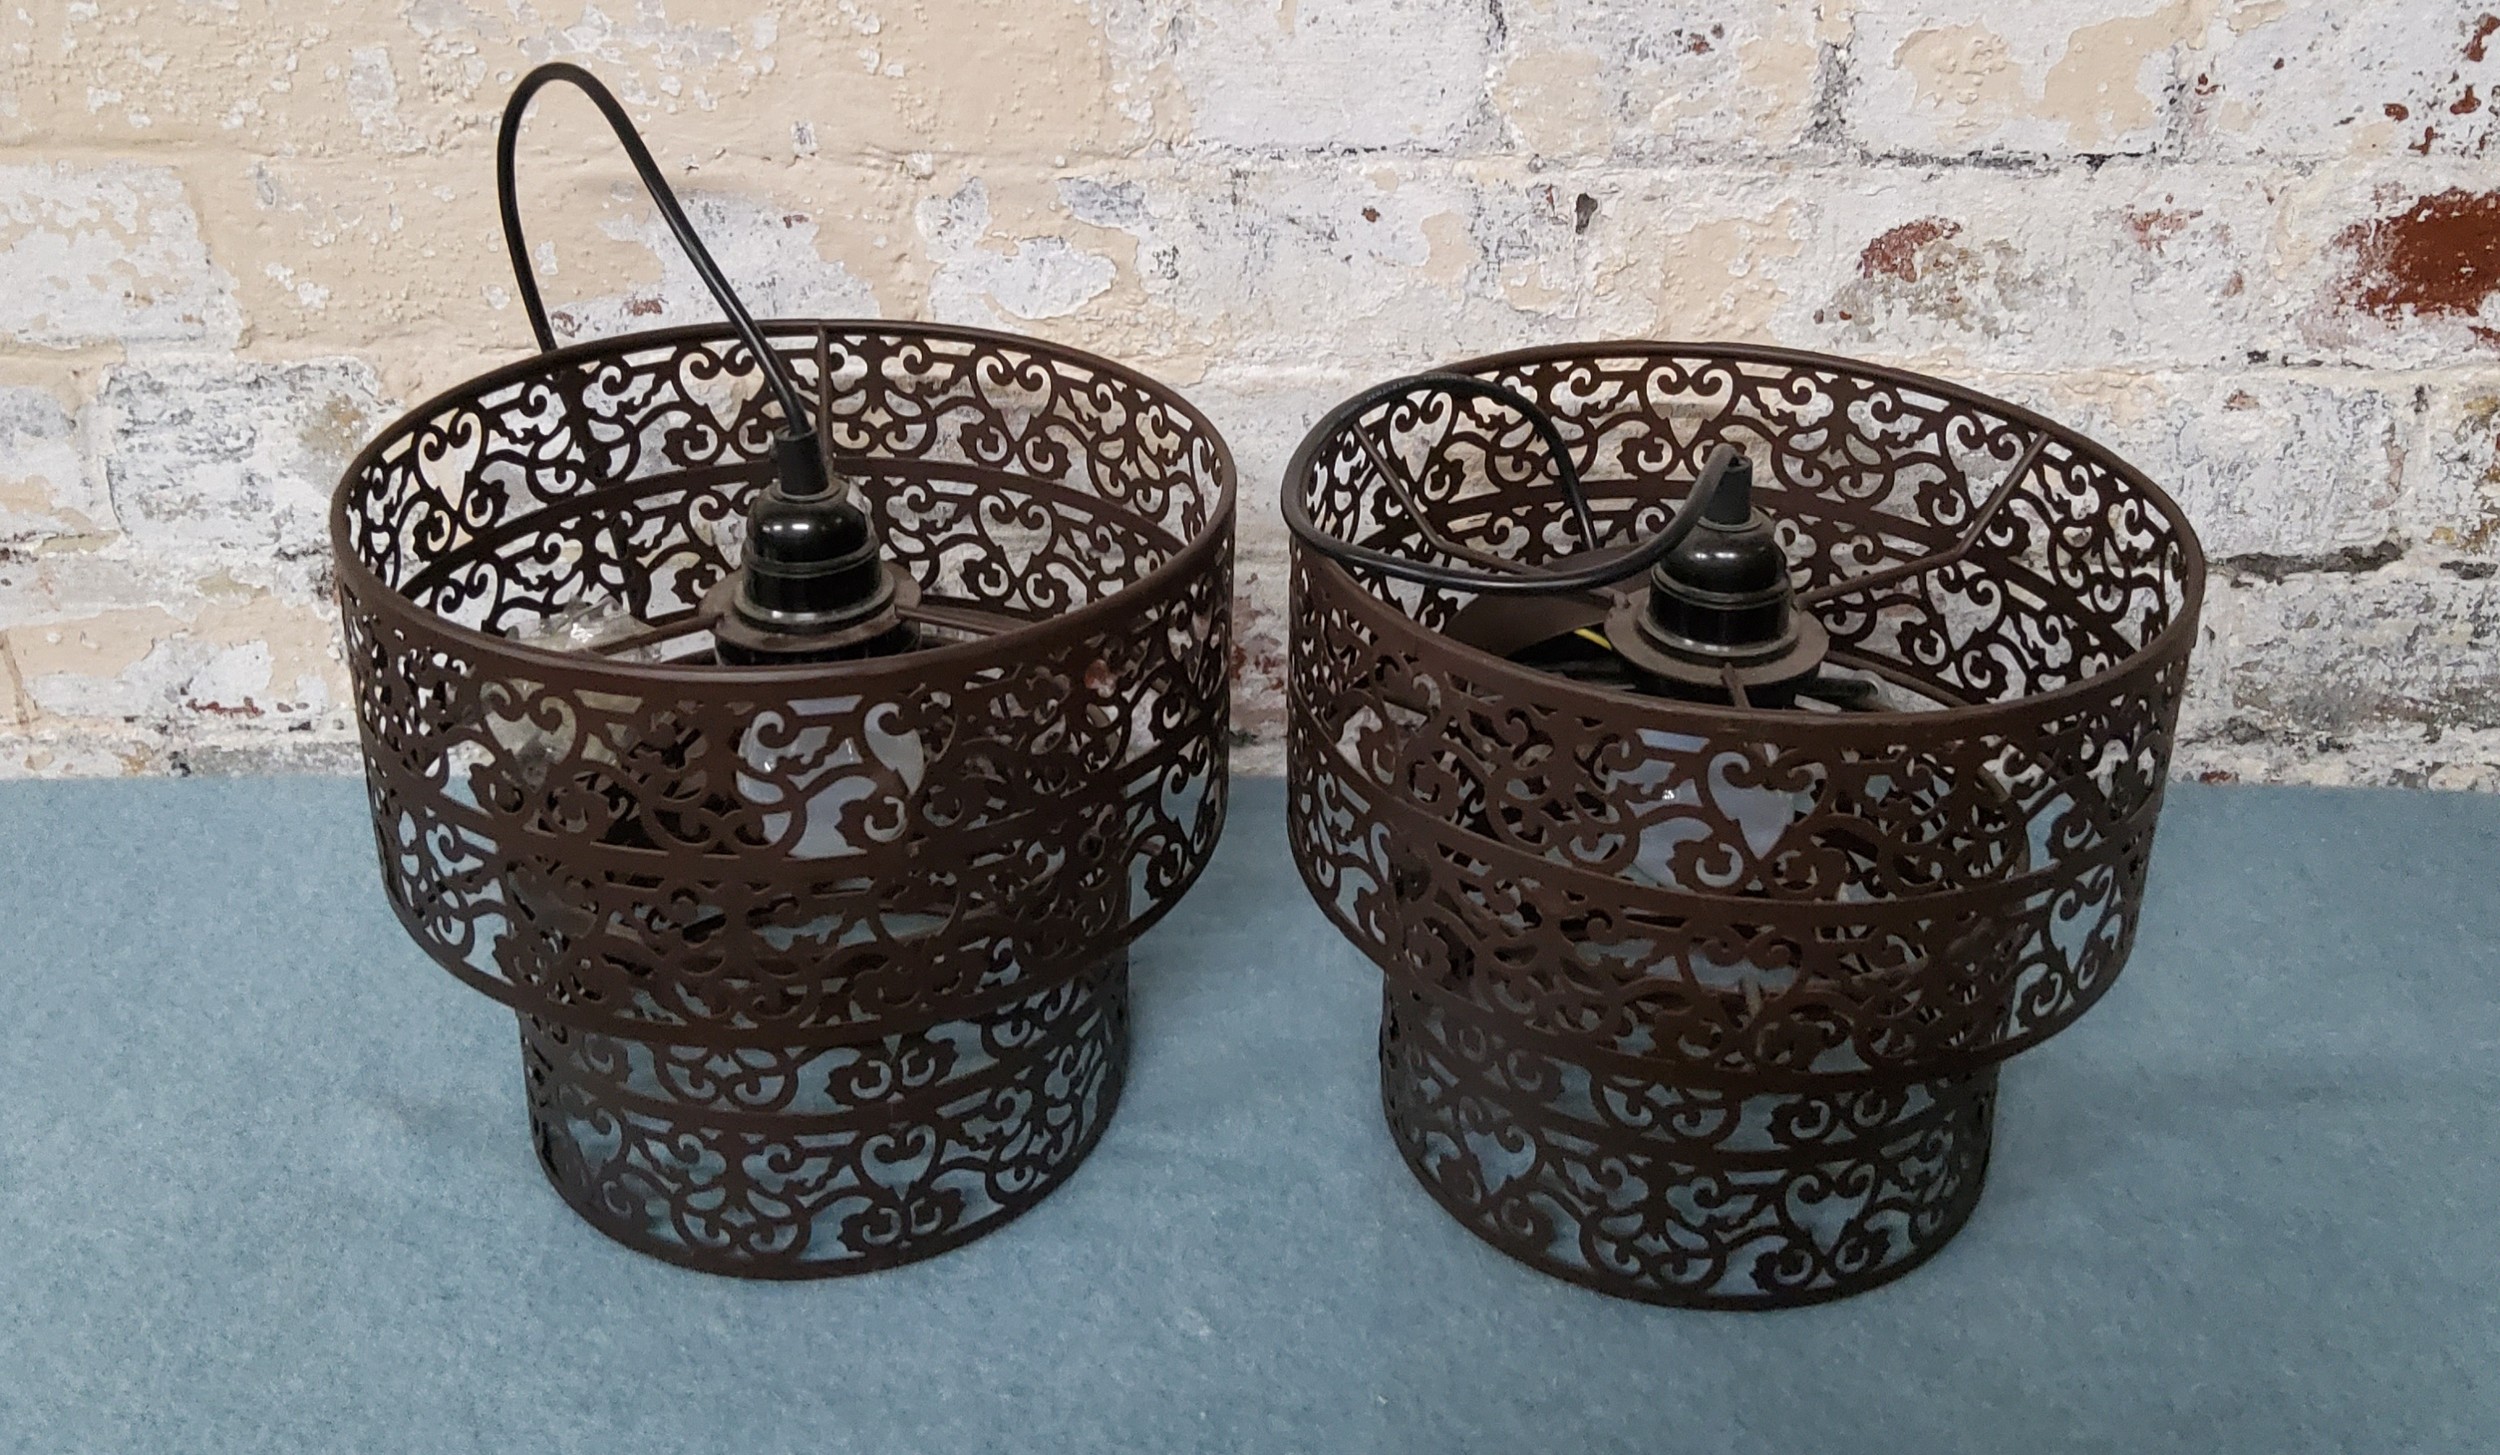 A pair of circular Moroccan style ceiling lights, brown painted metal, ES bulb fittings,  modern - Image 3 of 4